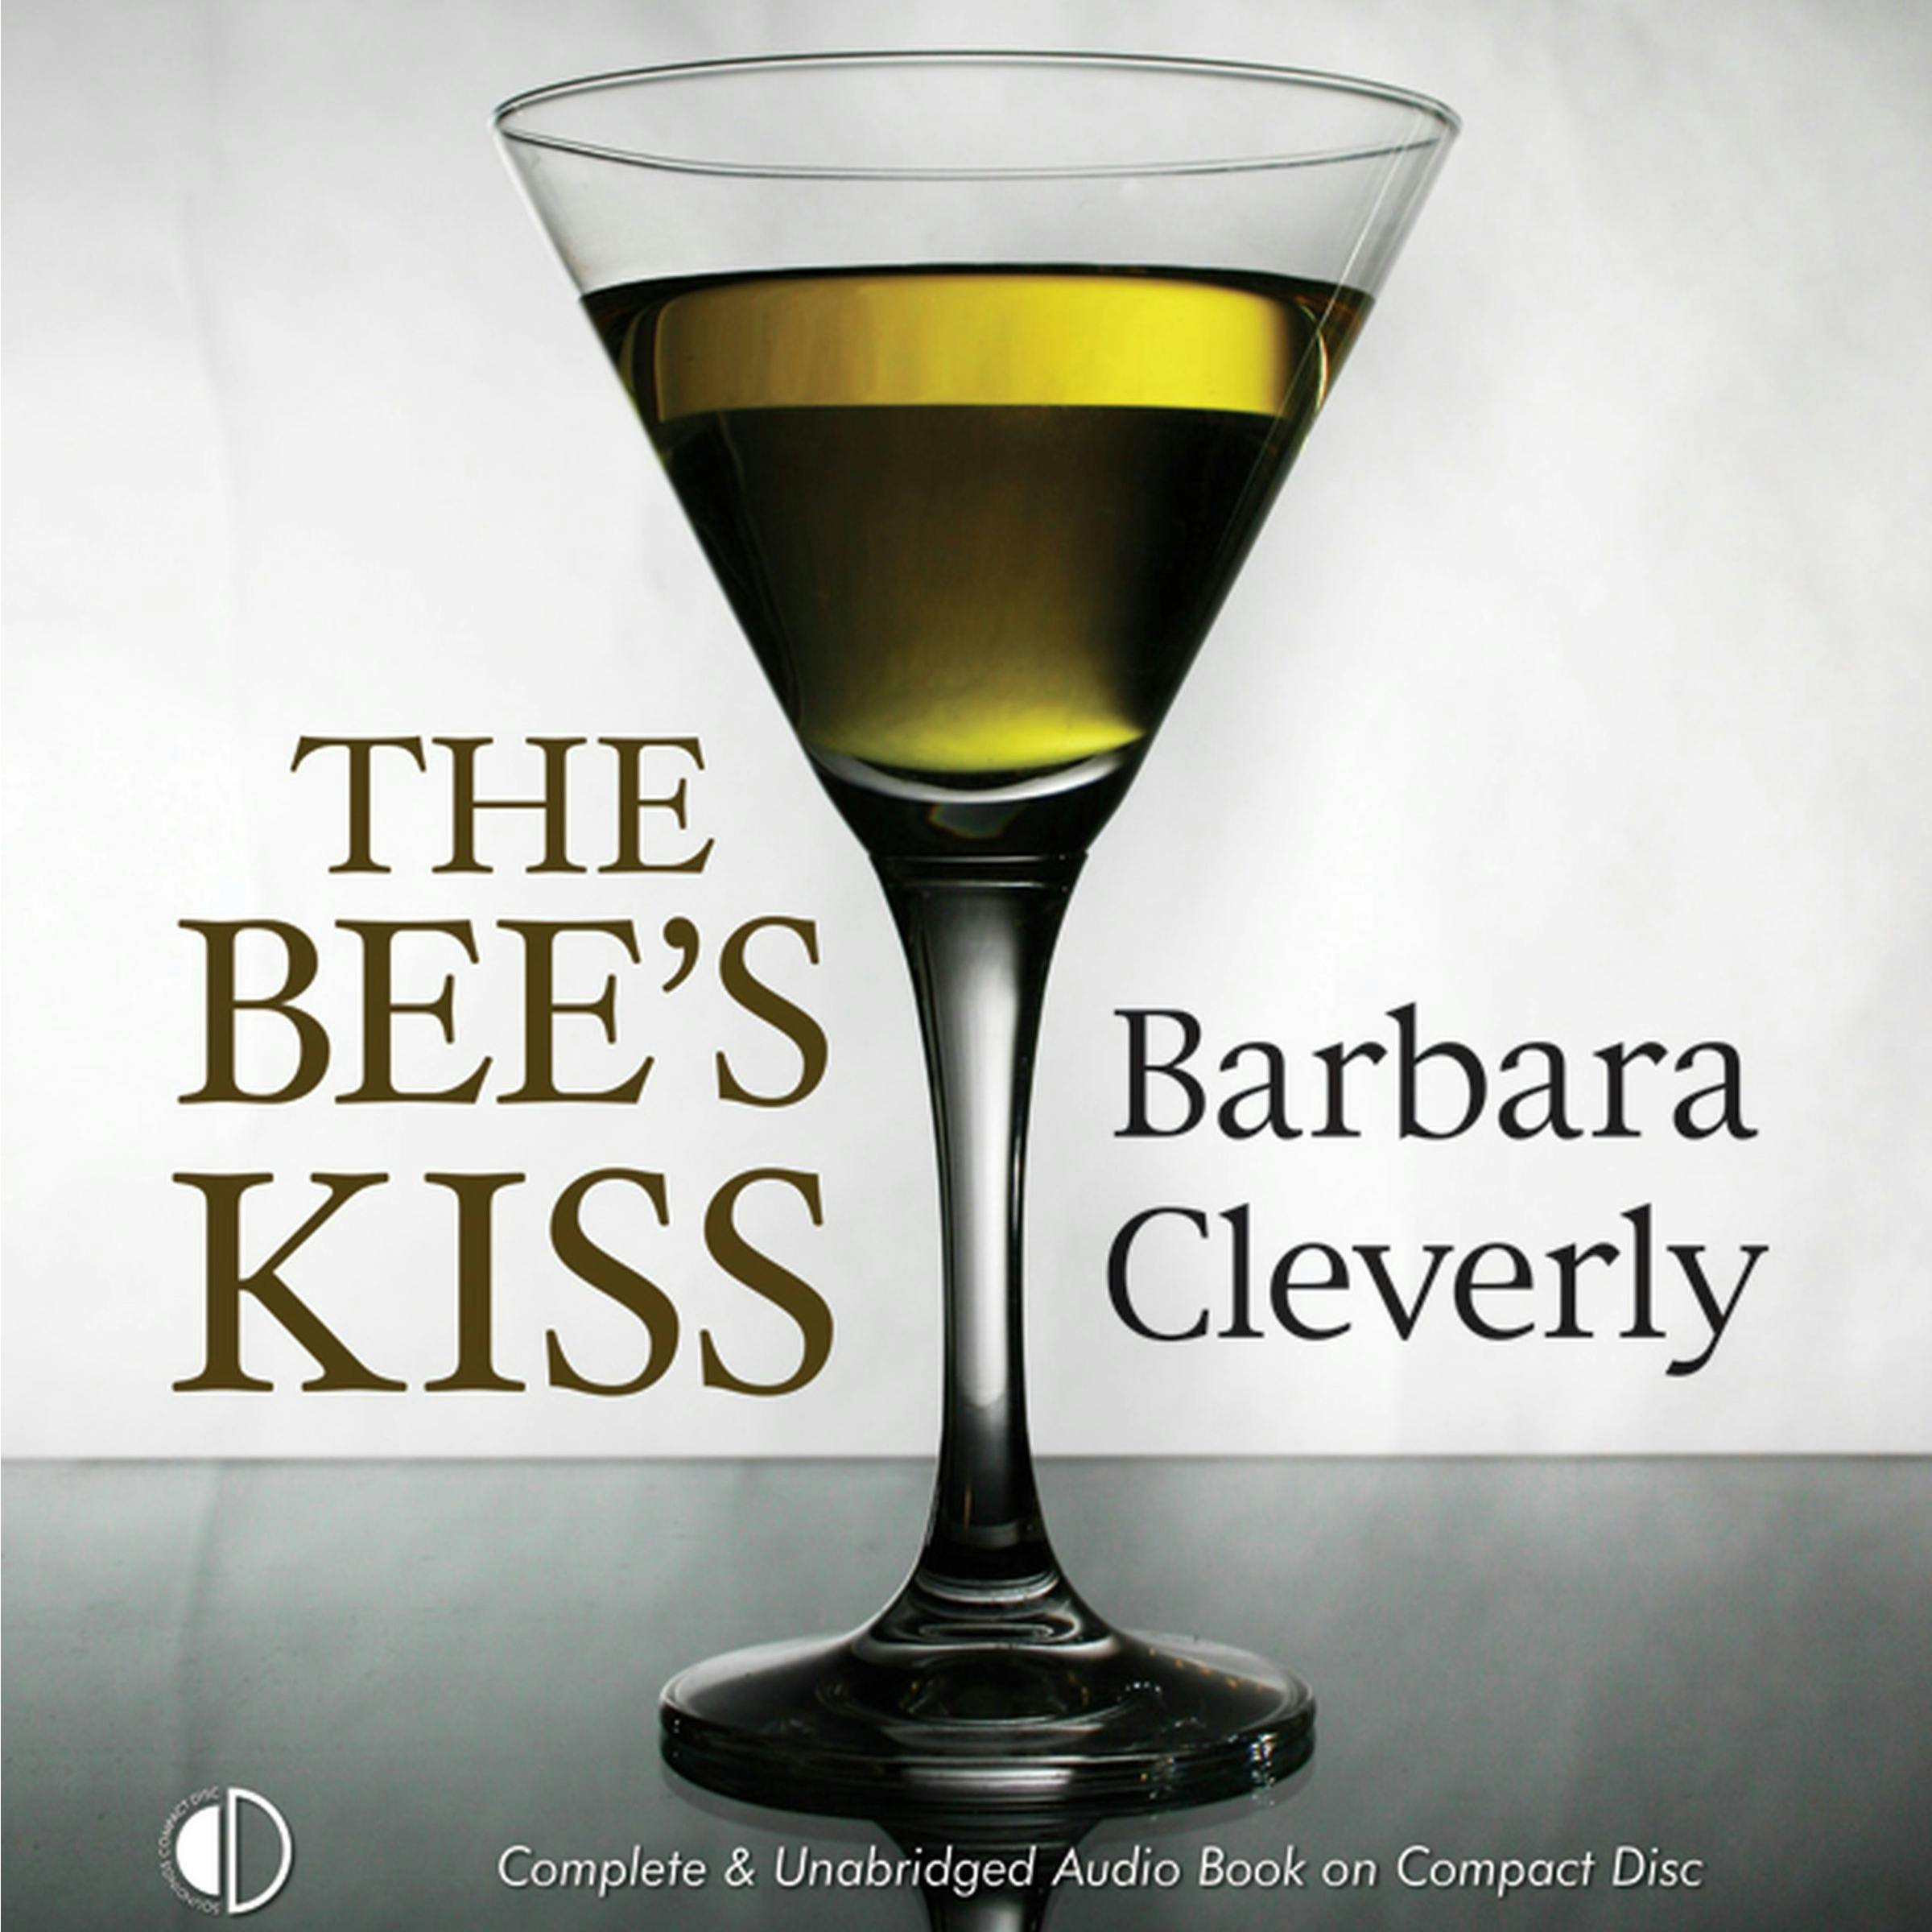 The Bee's Kiss - Barbara Cleverly